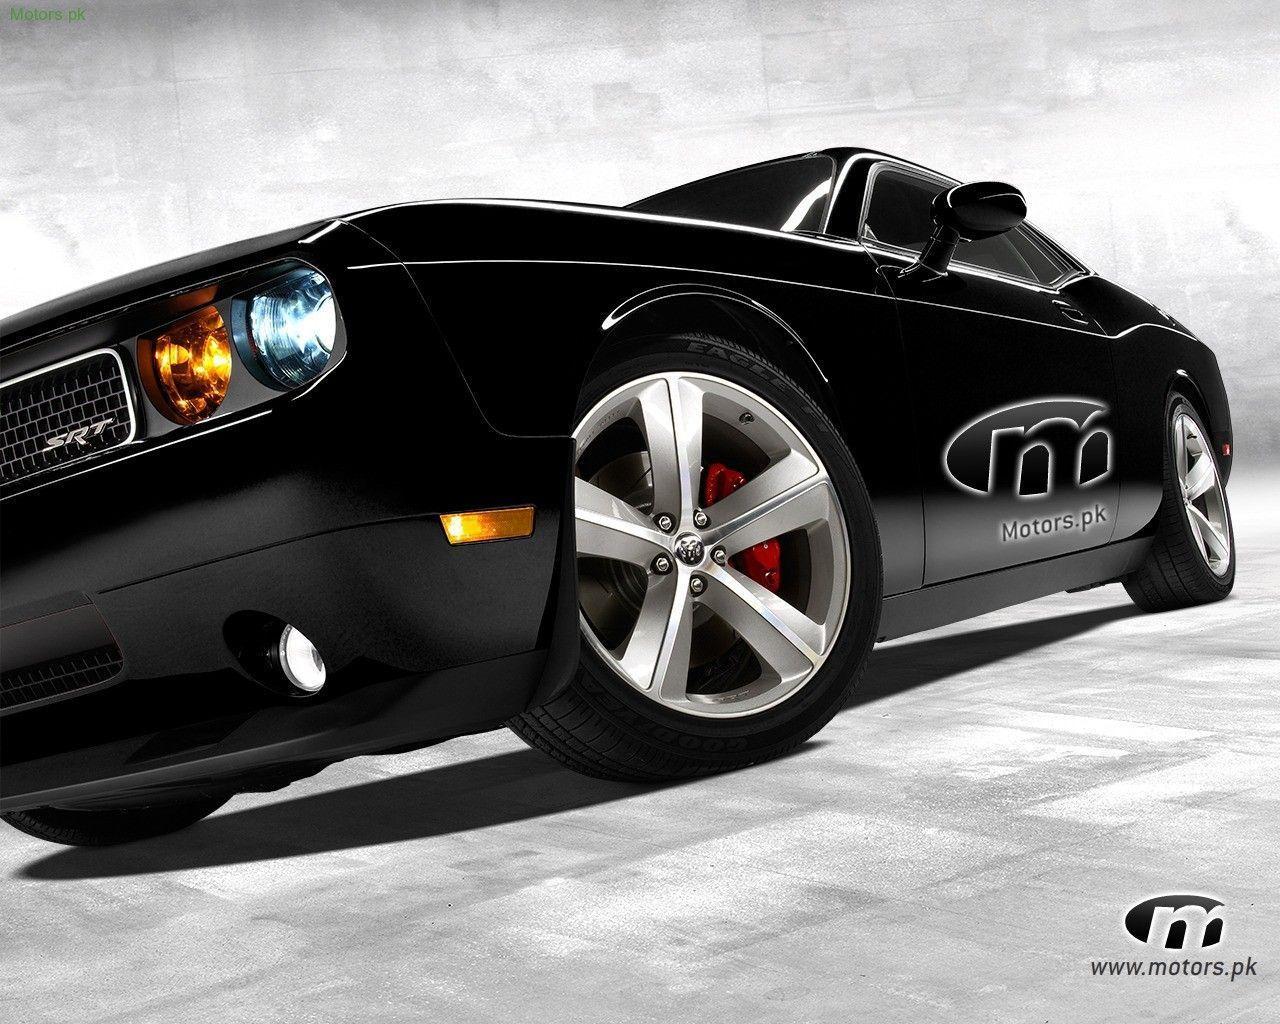 Wallpaper Of Muscle Cars. coolstyle wallpaper